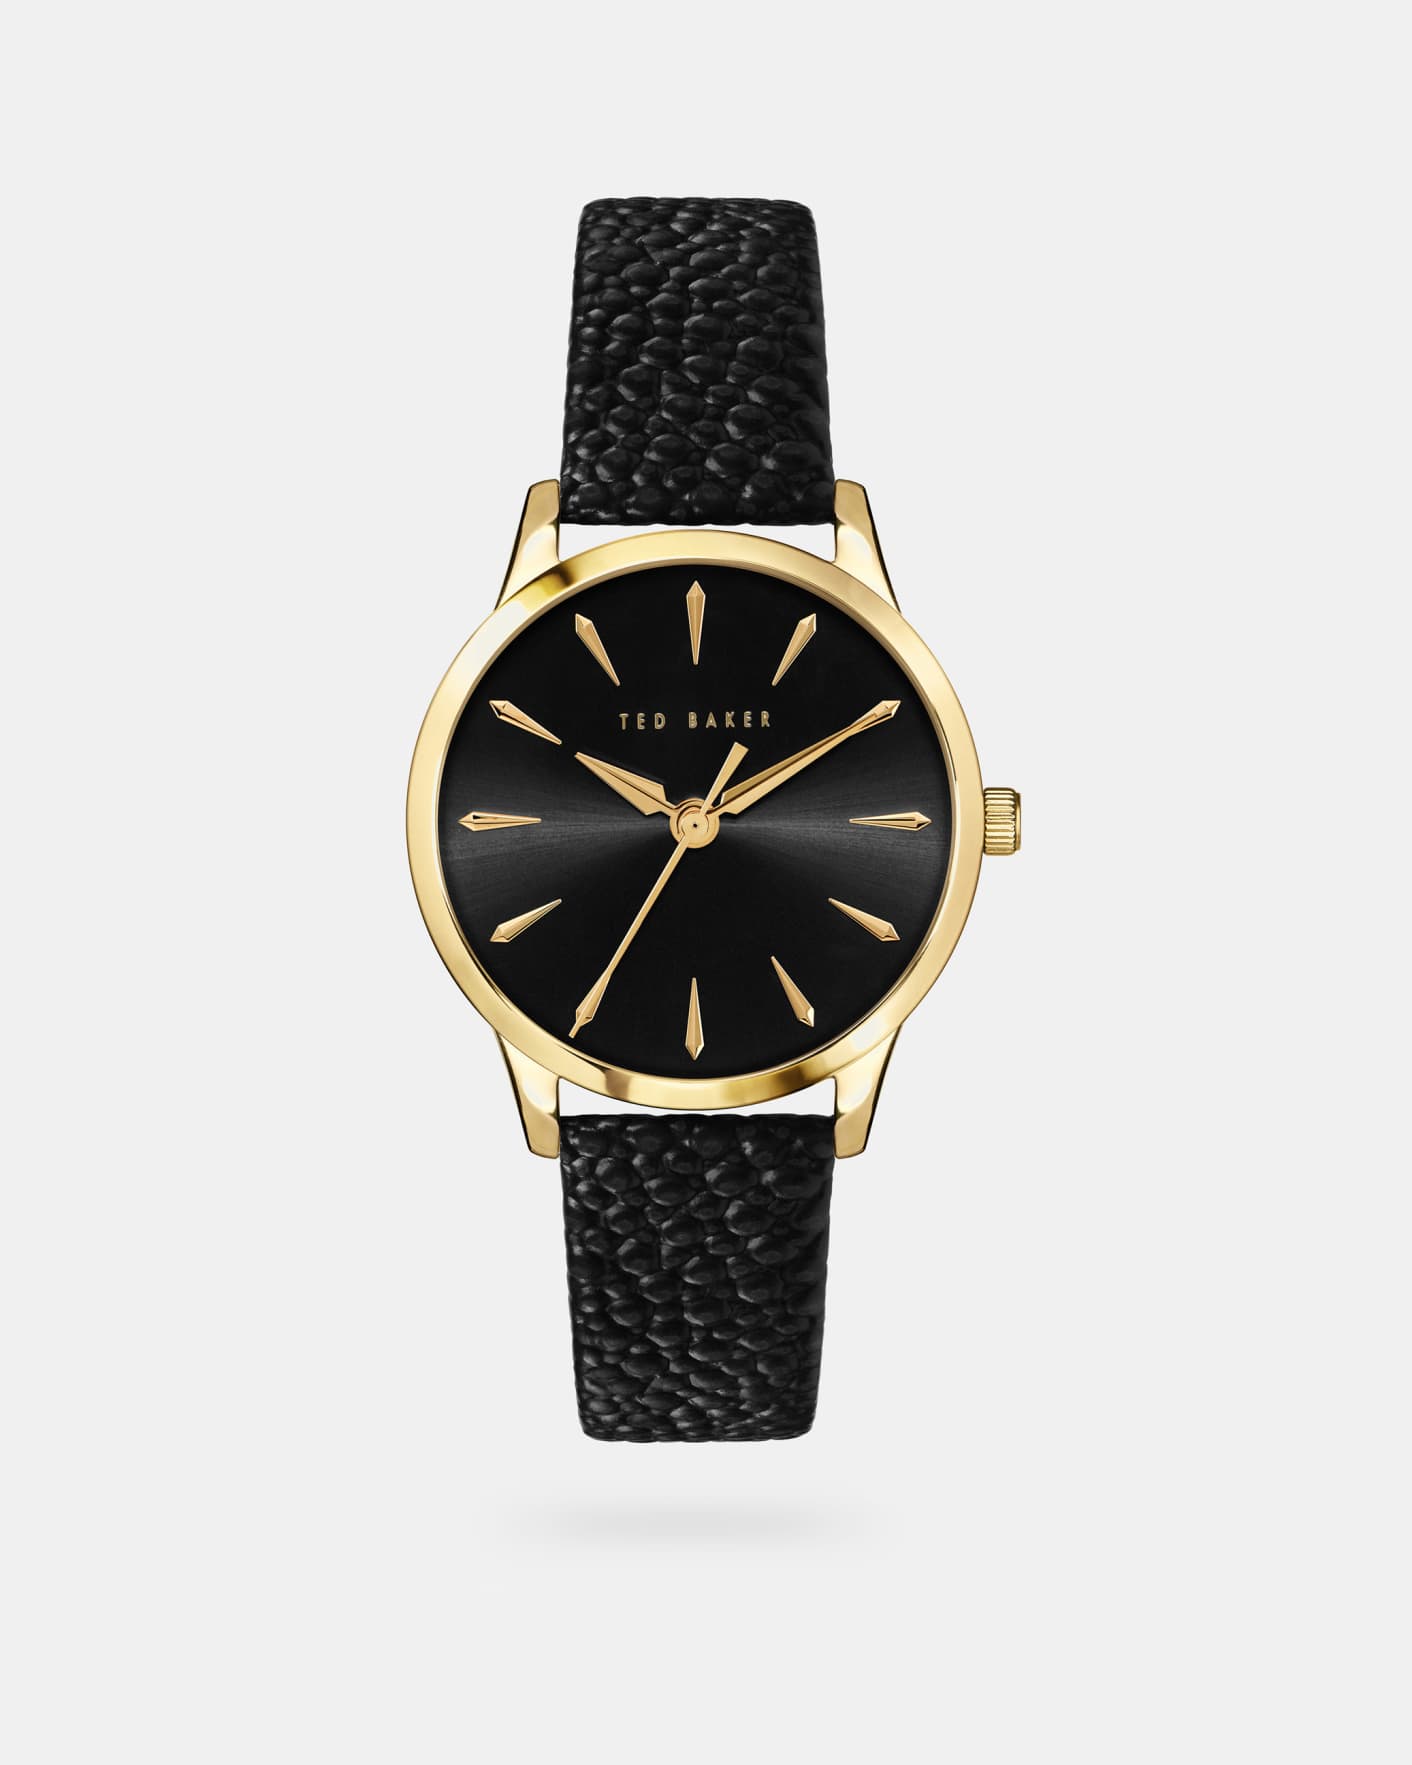 Black Black dial leather strap watch Ted Baker